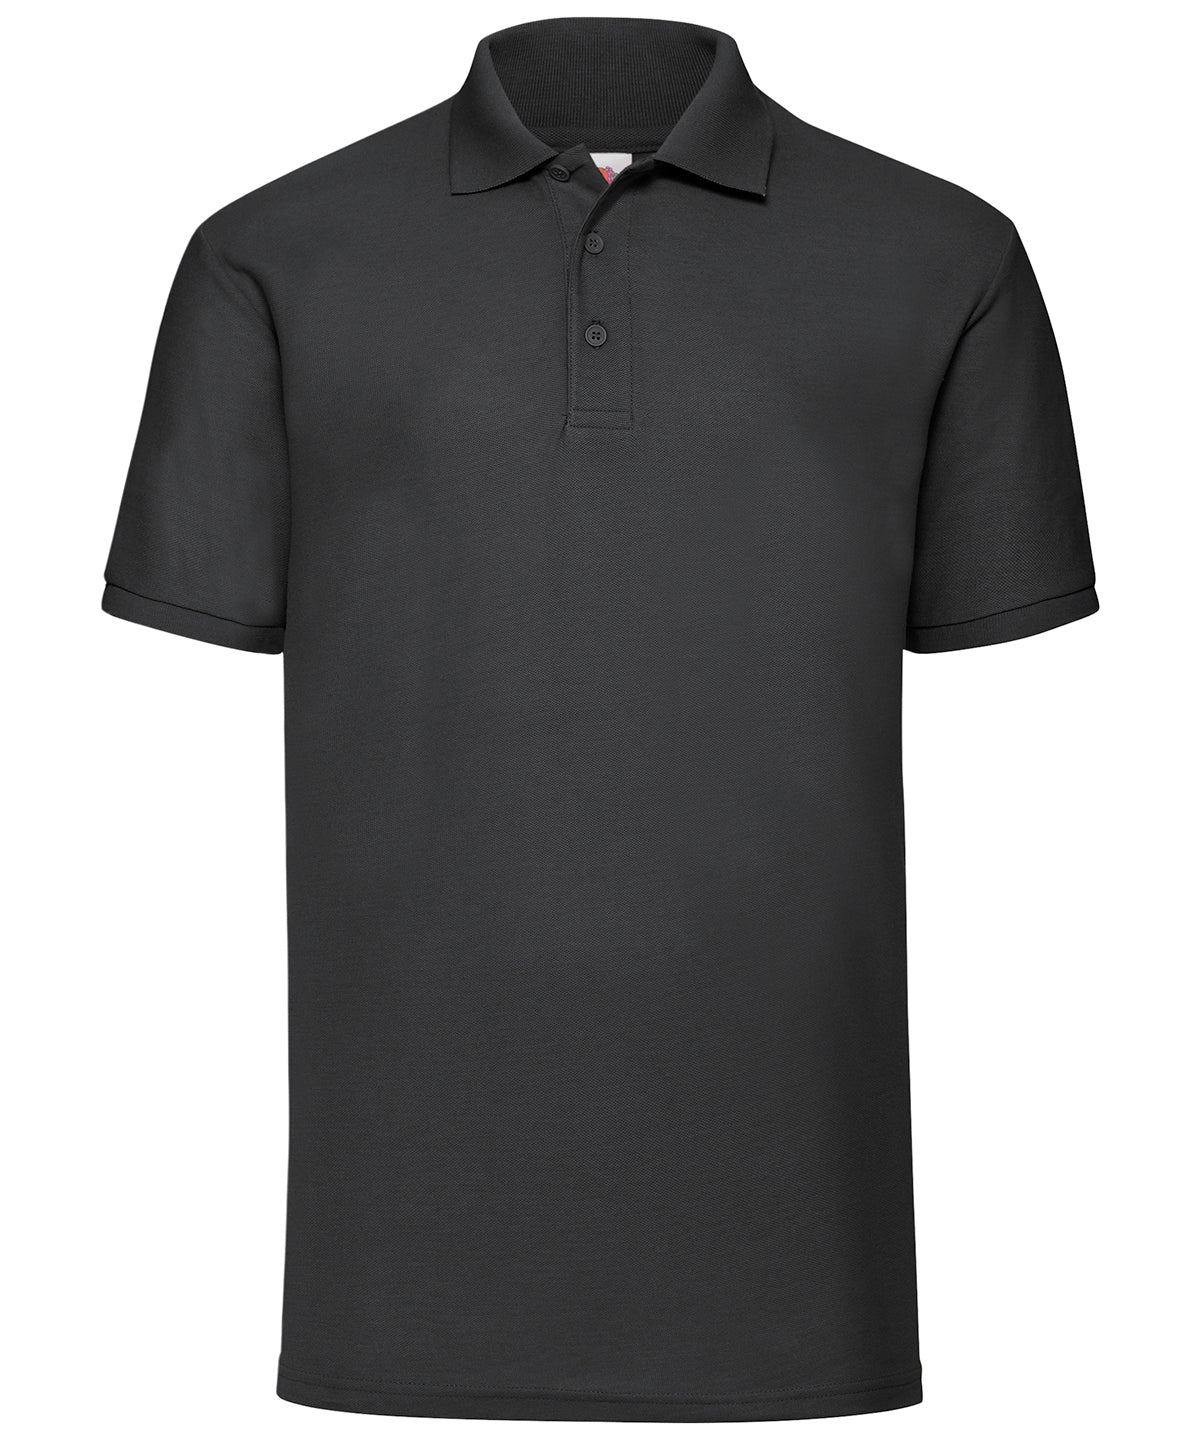 Black* - 65/35 Polo Polos Fruit of the Loom 2022 Spring Edit, Fruit of the Loom Polos, Must Haves, Plus Sizes, Polos & Casual, Polos safe to wash at 60 degrees, Price Lock, Safe to wash at 60 degrees, Sports & Leisure, Workwear Schoolwear Centres